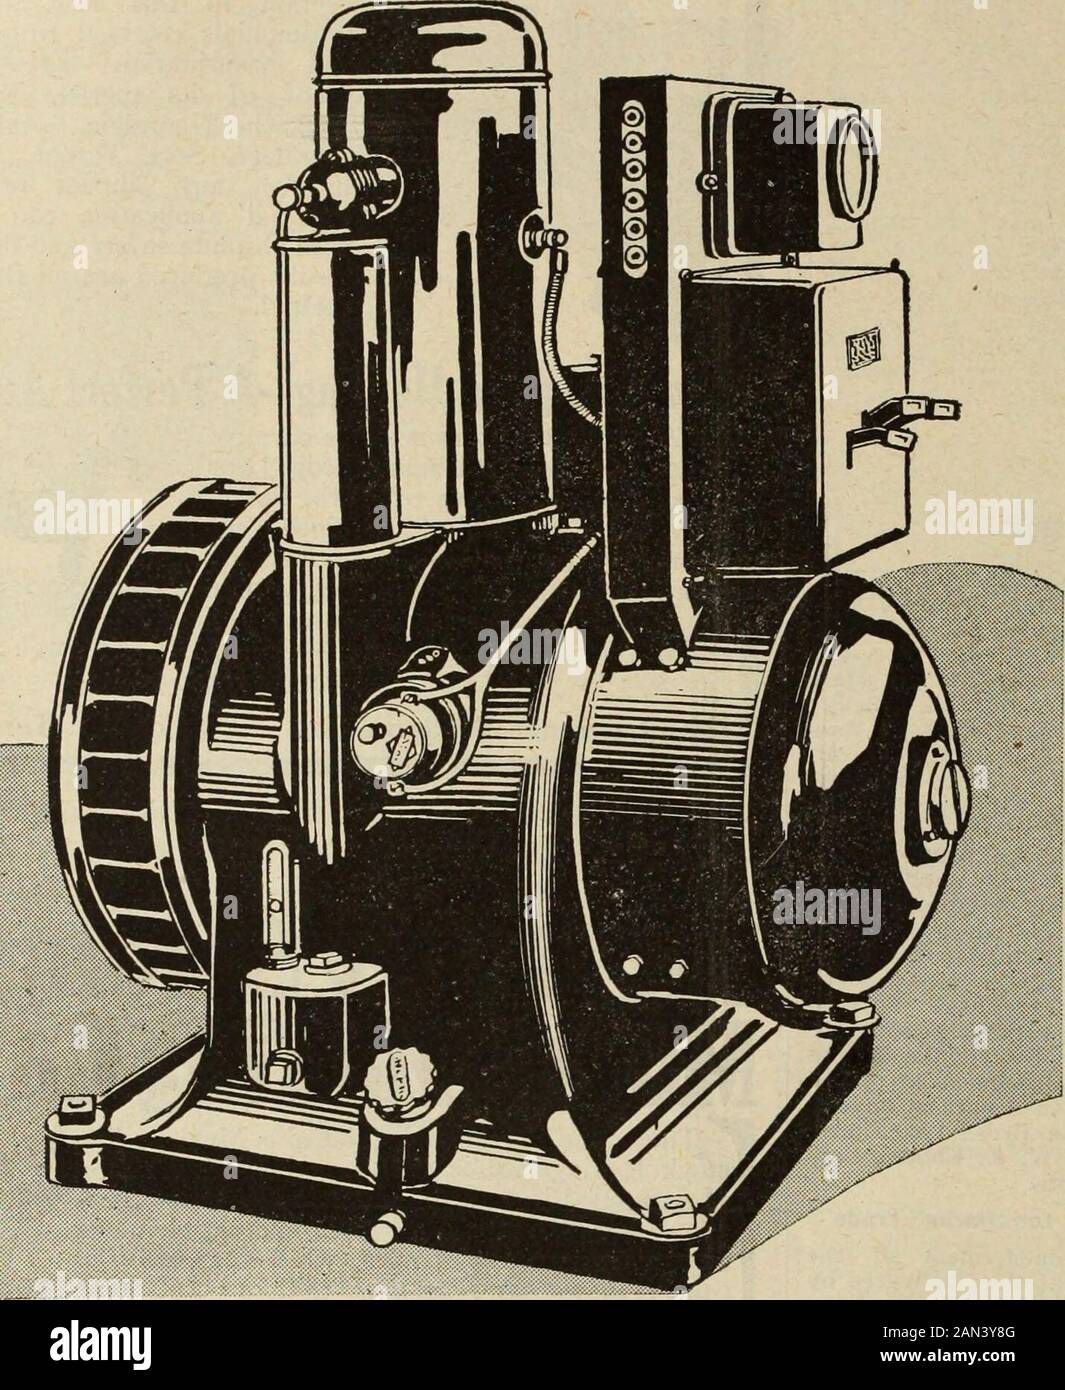 Farmer's magazine (January-December 1920) . An Irr is cordia / to everyor Canadian Nation; to II this WO] Electric DOMINION LIGH has been developed by the best engineering- skill in North America.DOMINION LIGHT is an Electric Lighting Plant for the farm orcountry home that is durable, simple and efficient, with ample capa-city for lighting and electrical appliances. DOMINION STEEL PRODUCTS COi Farmers Magazine 21 Stock Photo